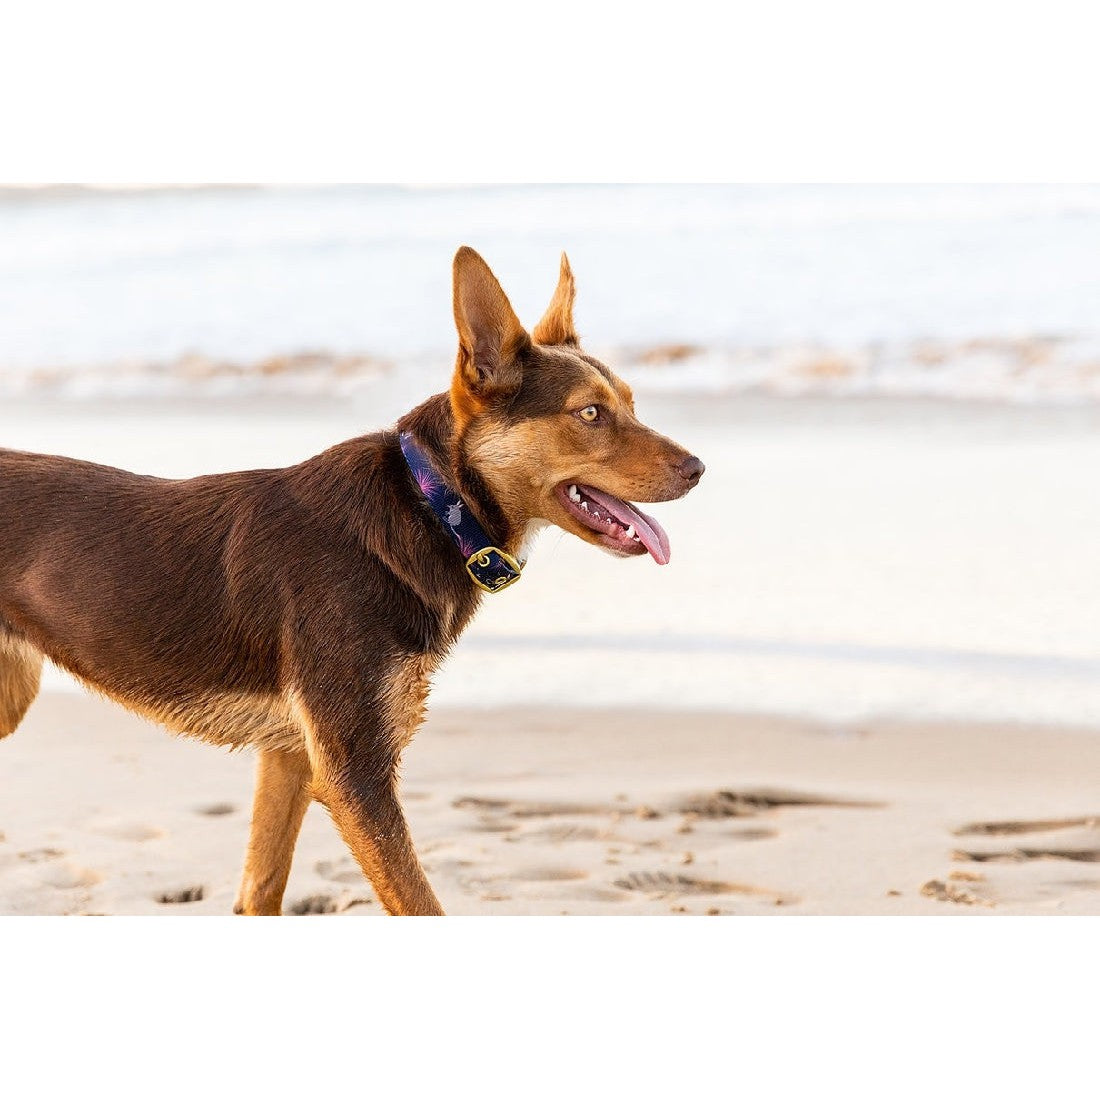 Anipal branded collar on attentive dog standing at beach.